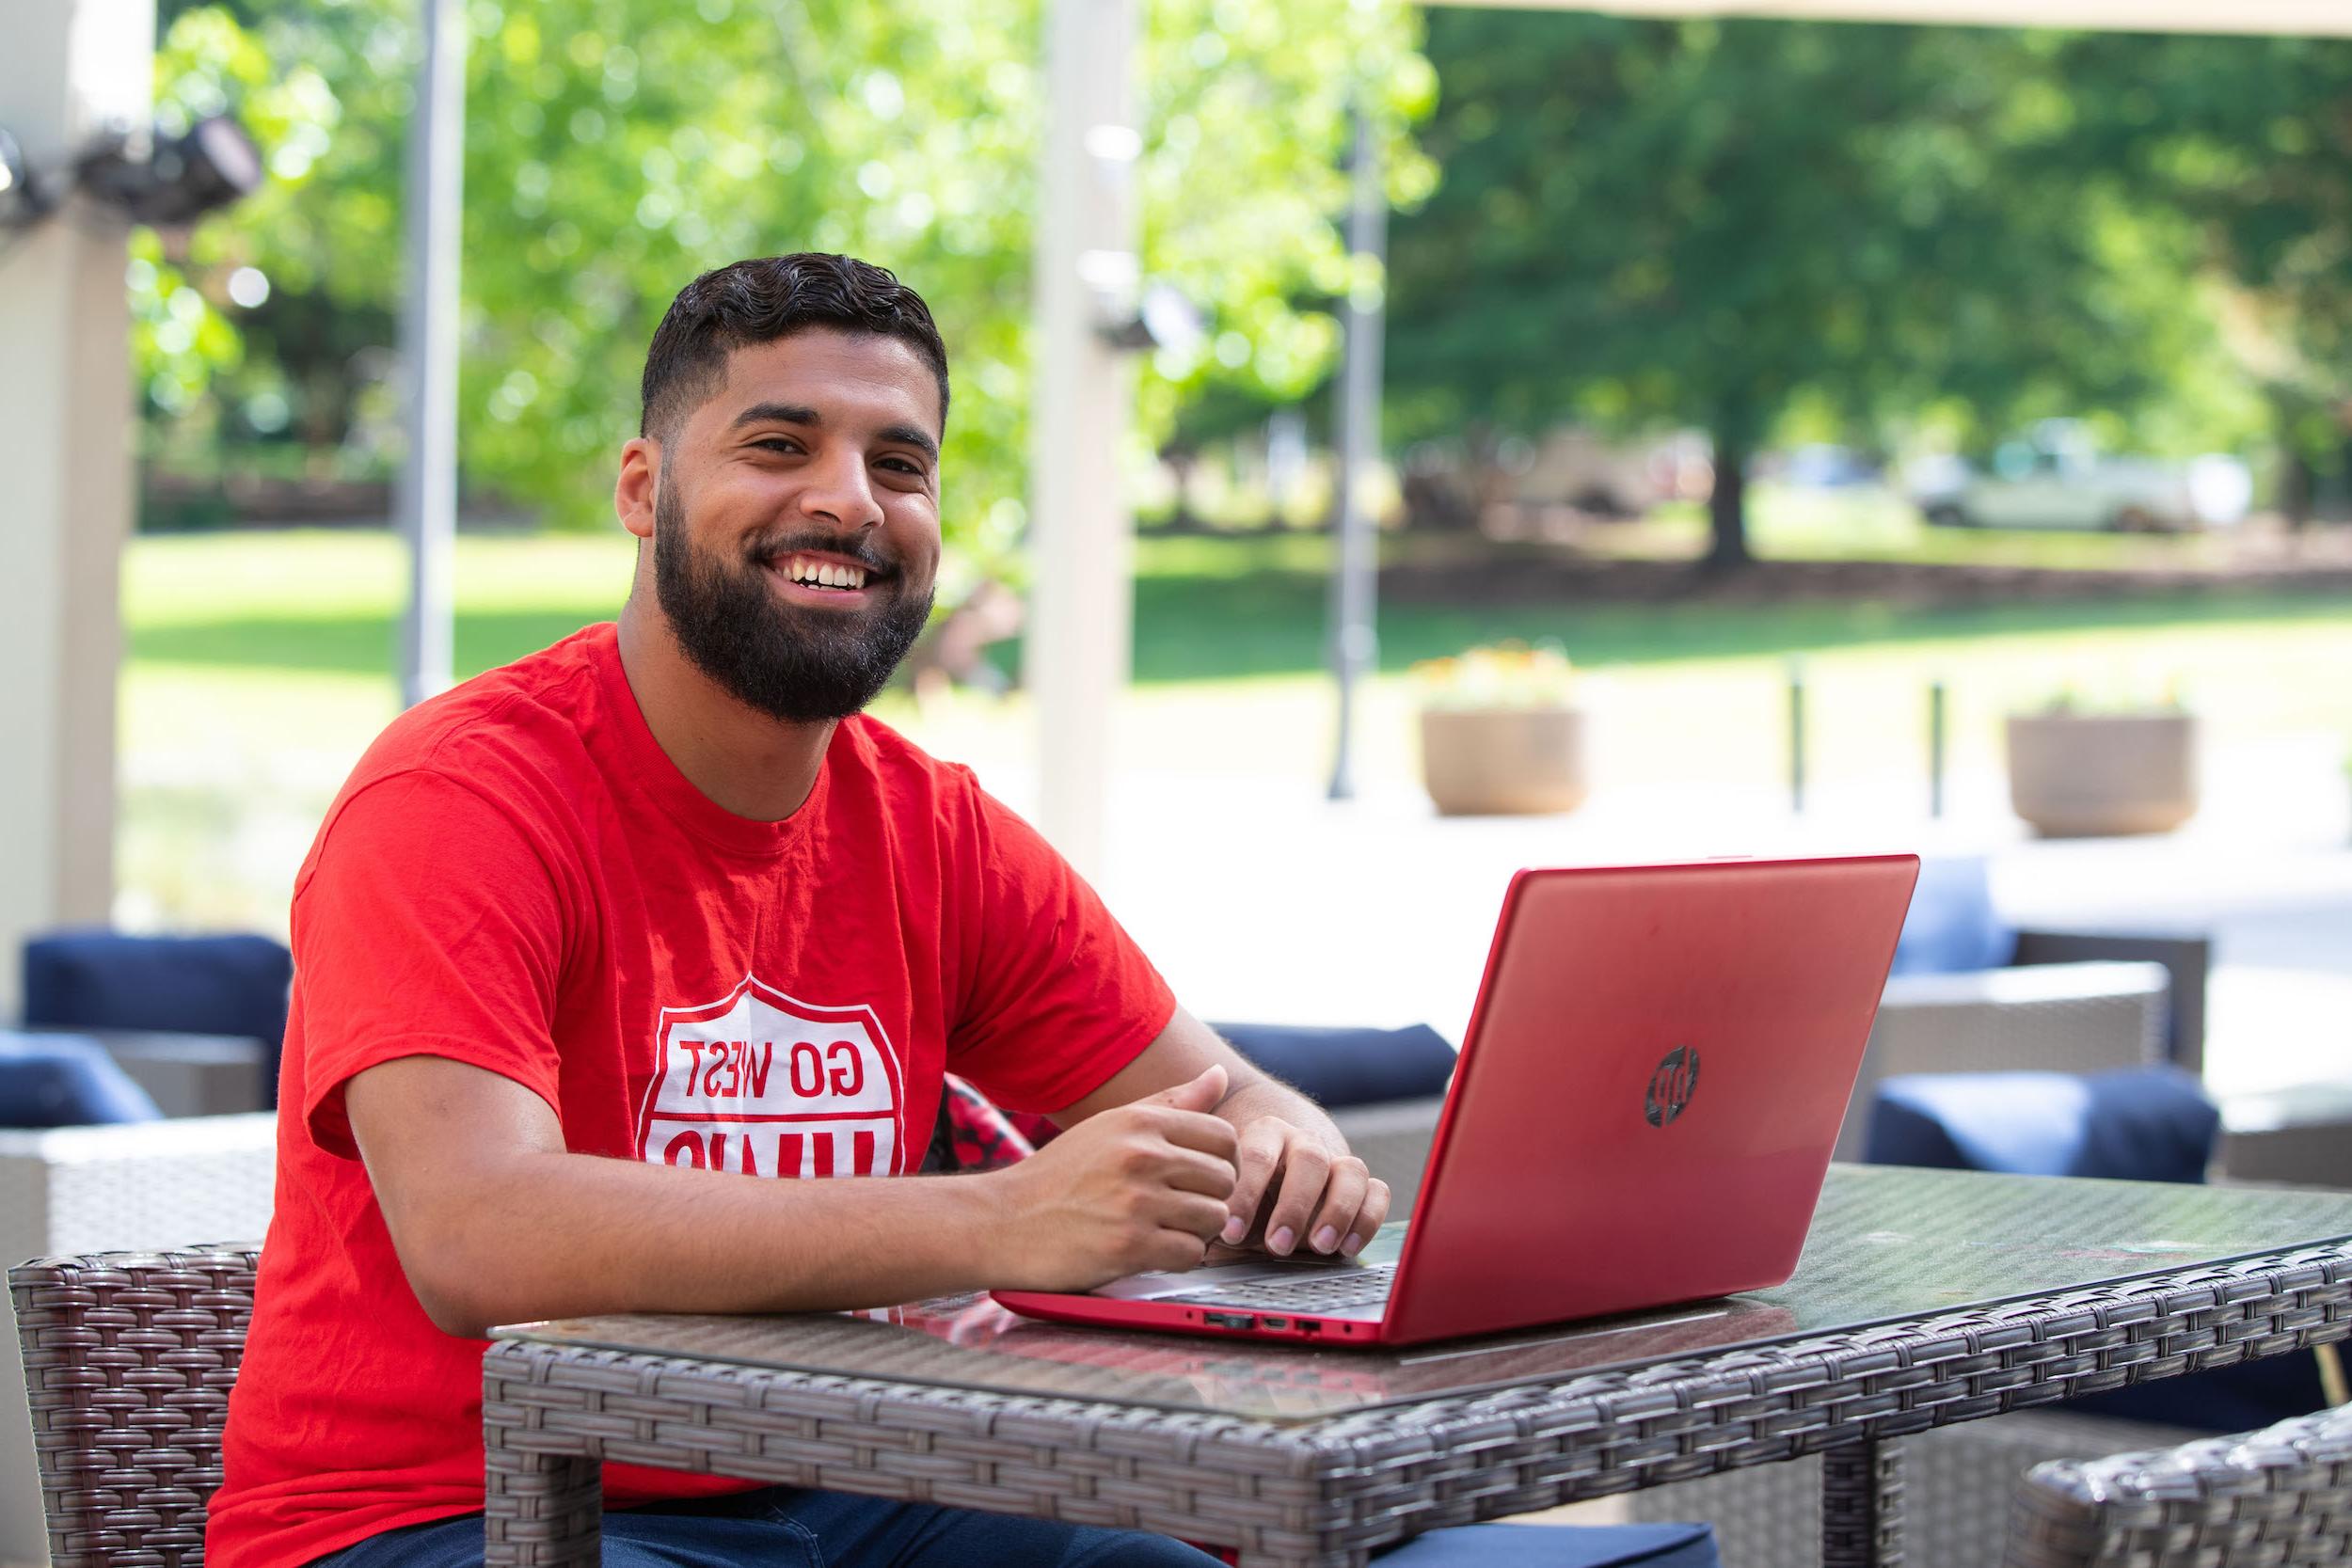 Male student smiling outside with red laptop.